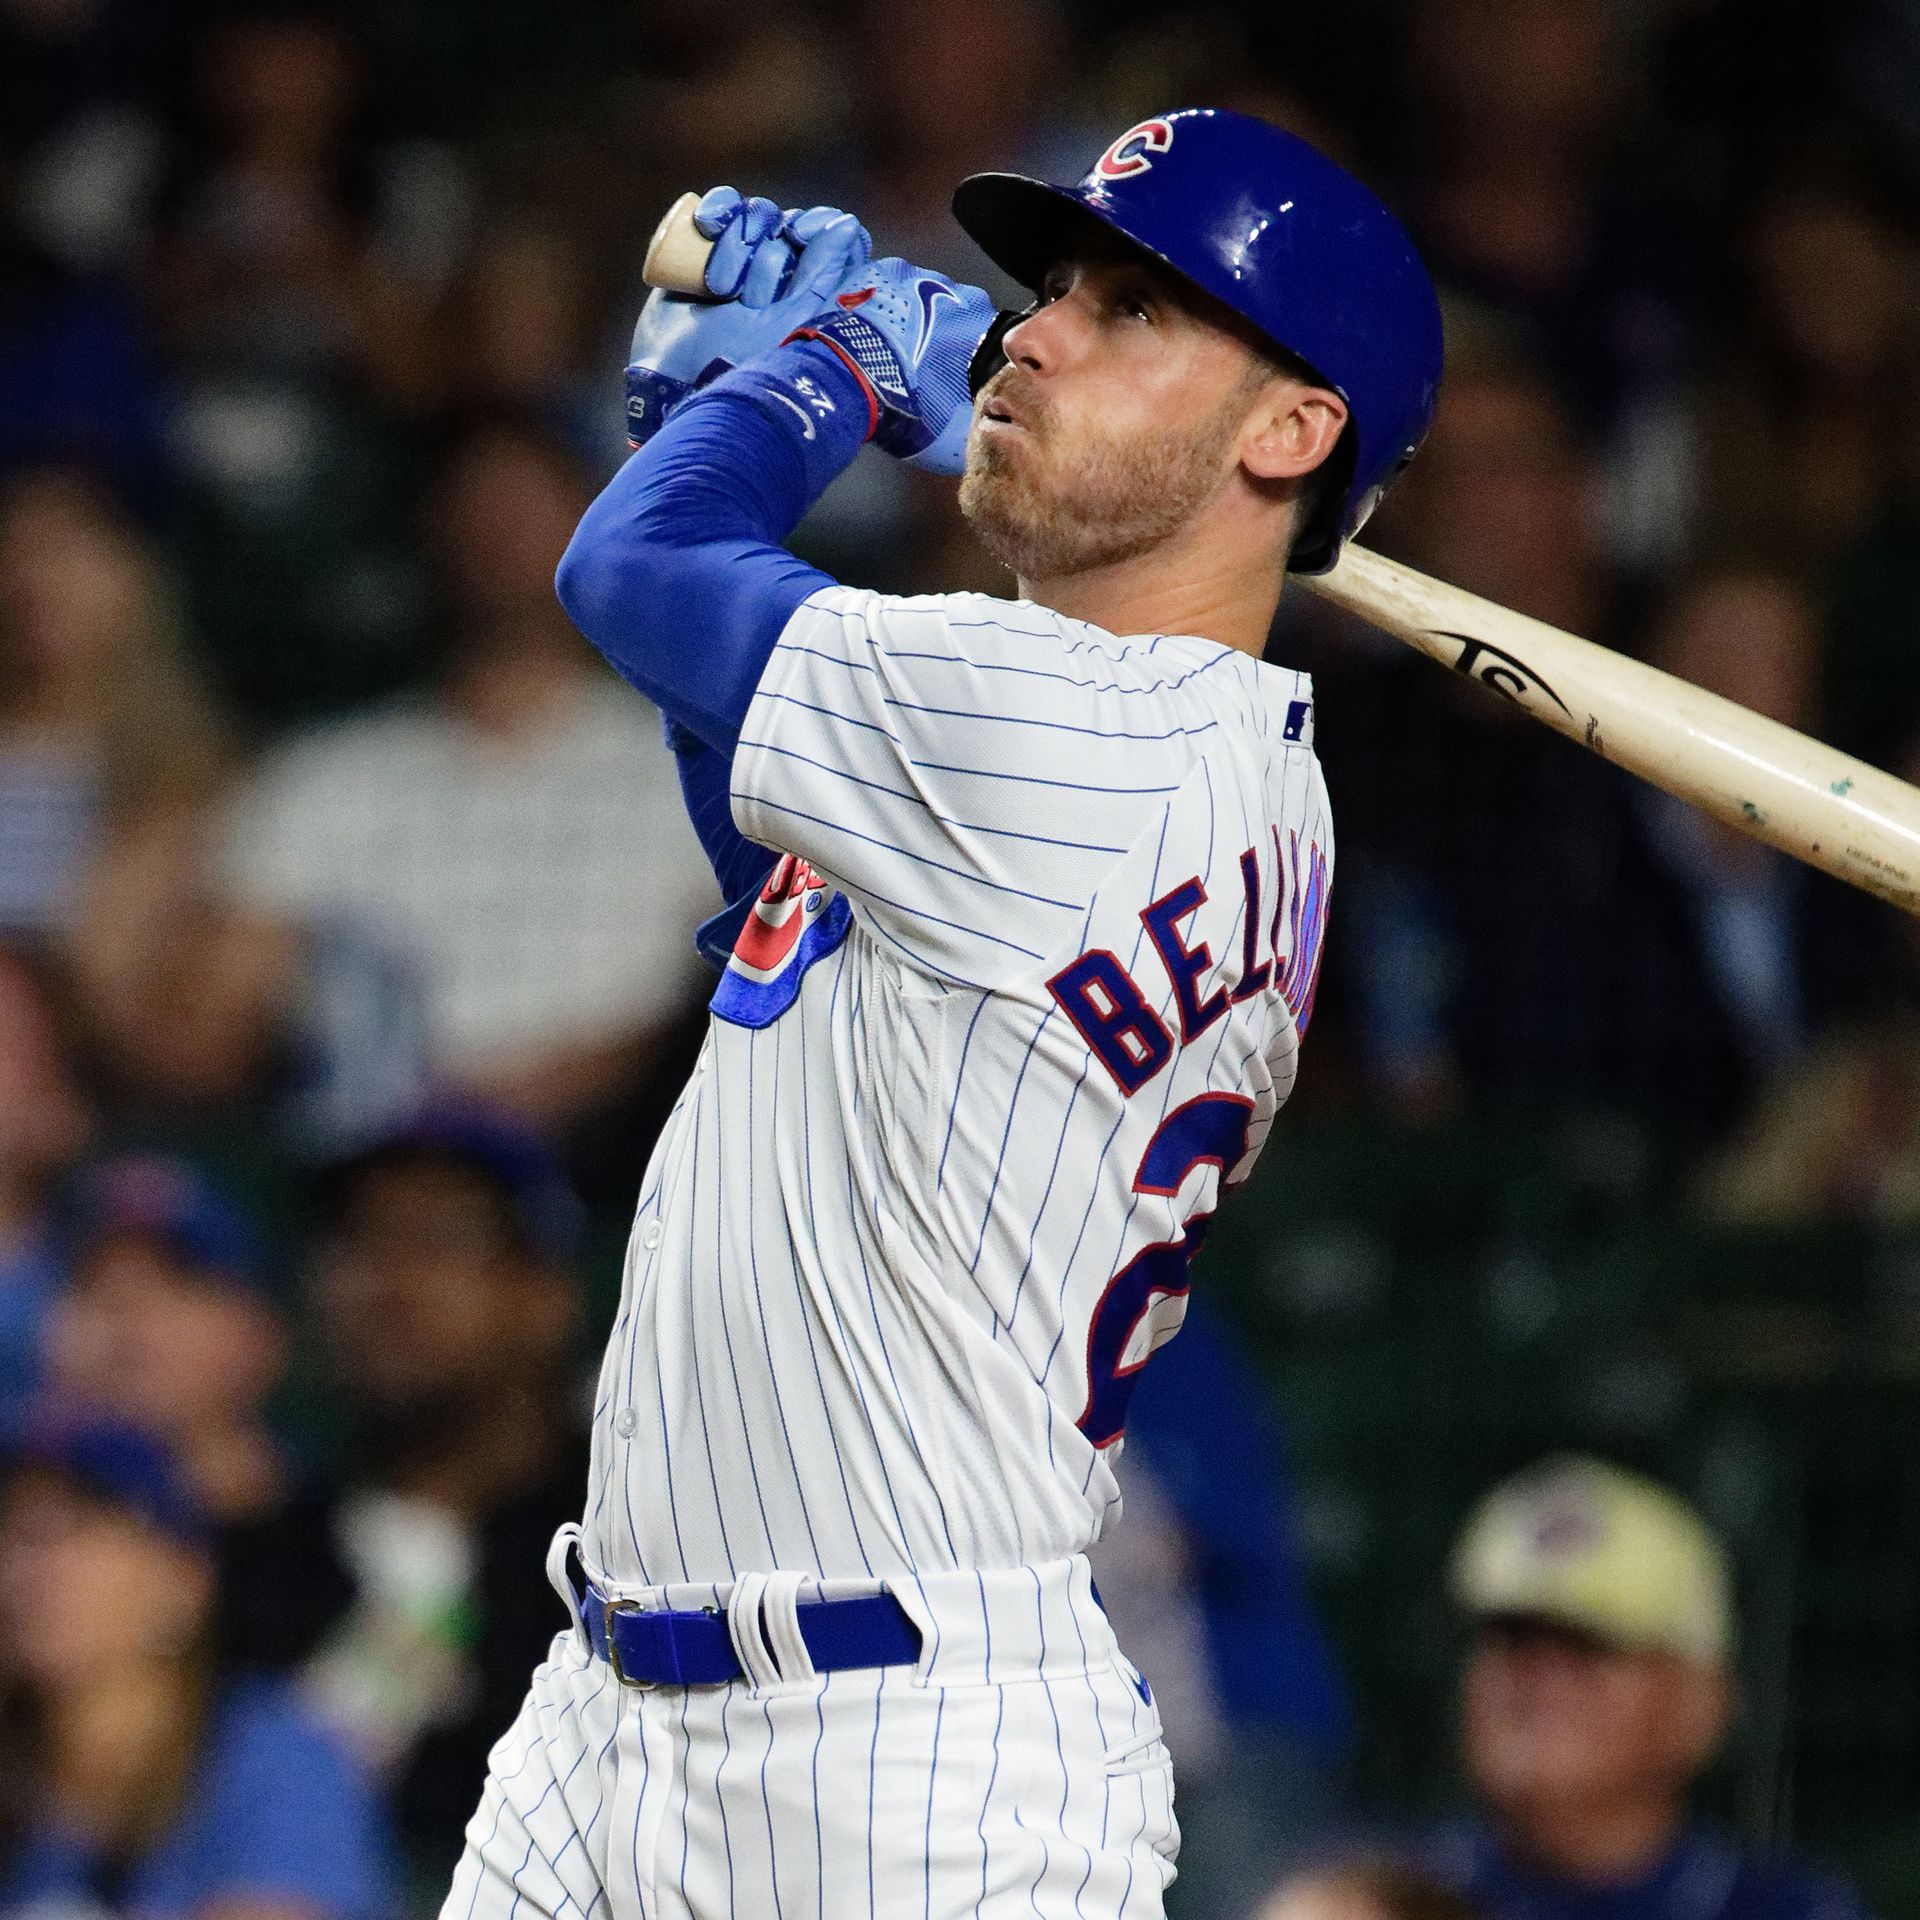 Sheffield to sign with Mets - Sports Illustrated